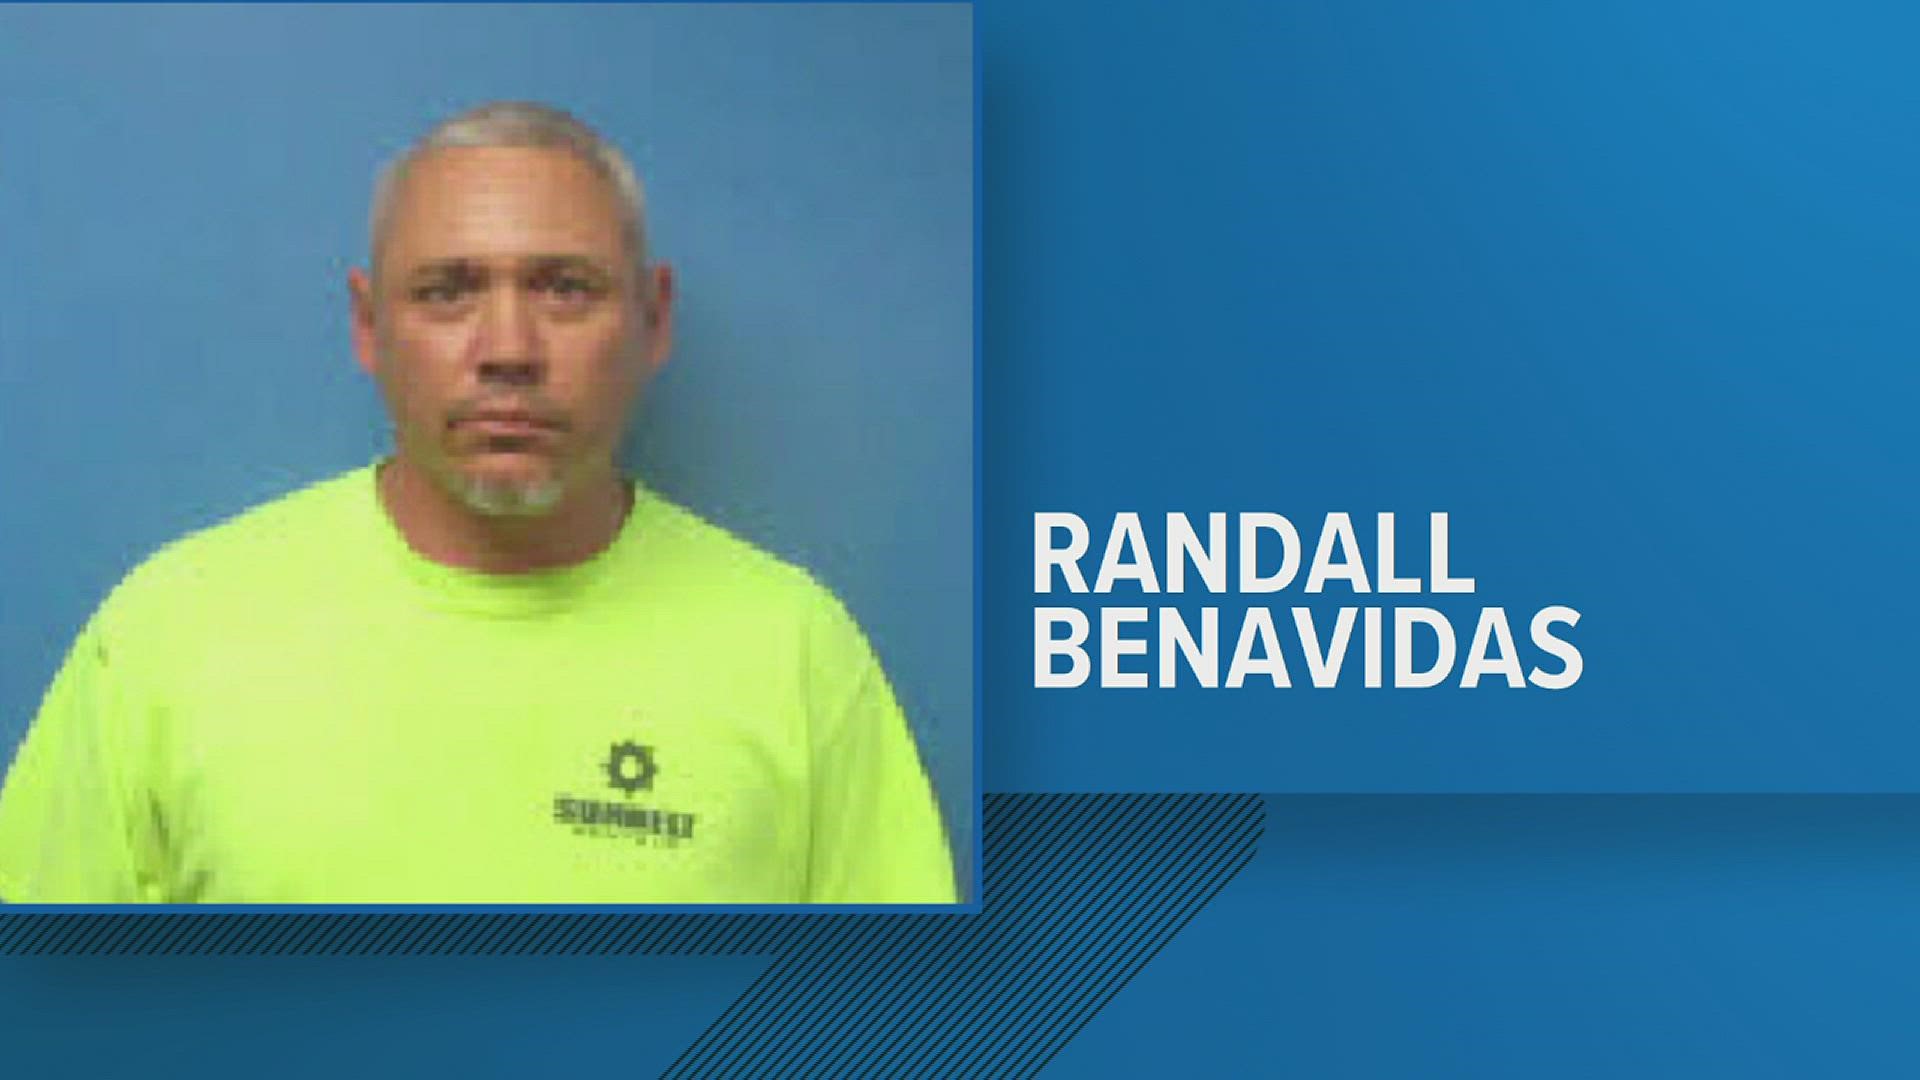 Hardin County Sheriff's deputies arrested Randall Lewis Benavidas Friday morning on online solicitation of a child charges.